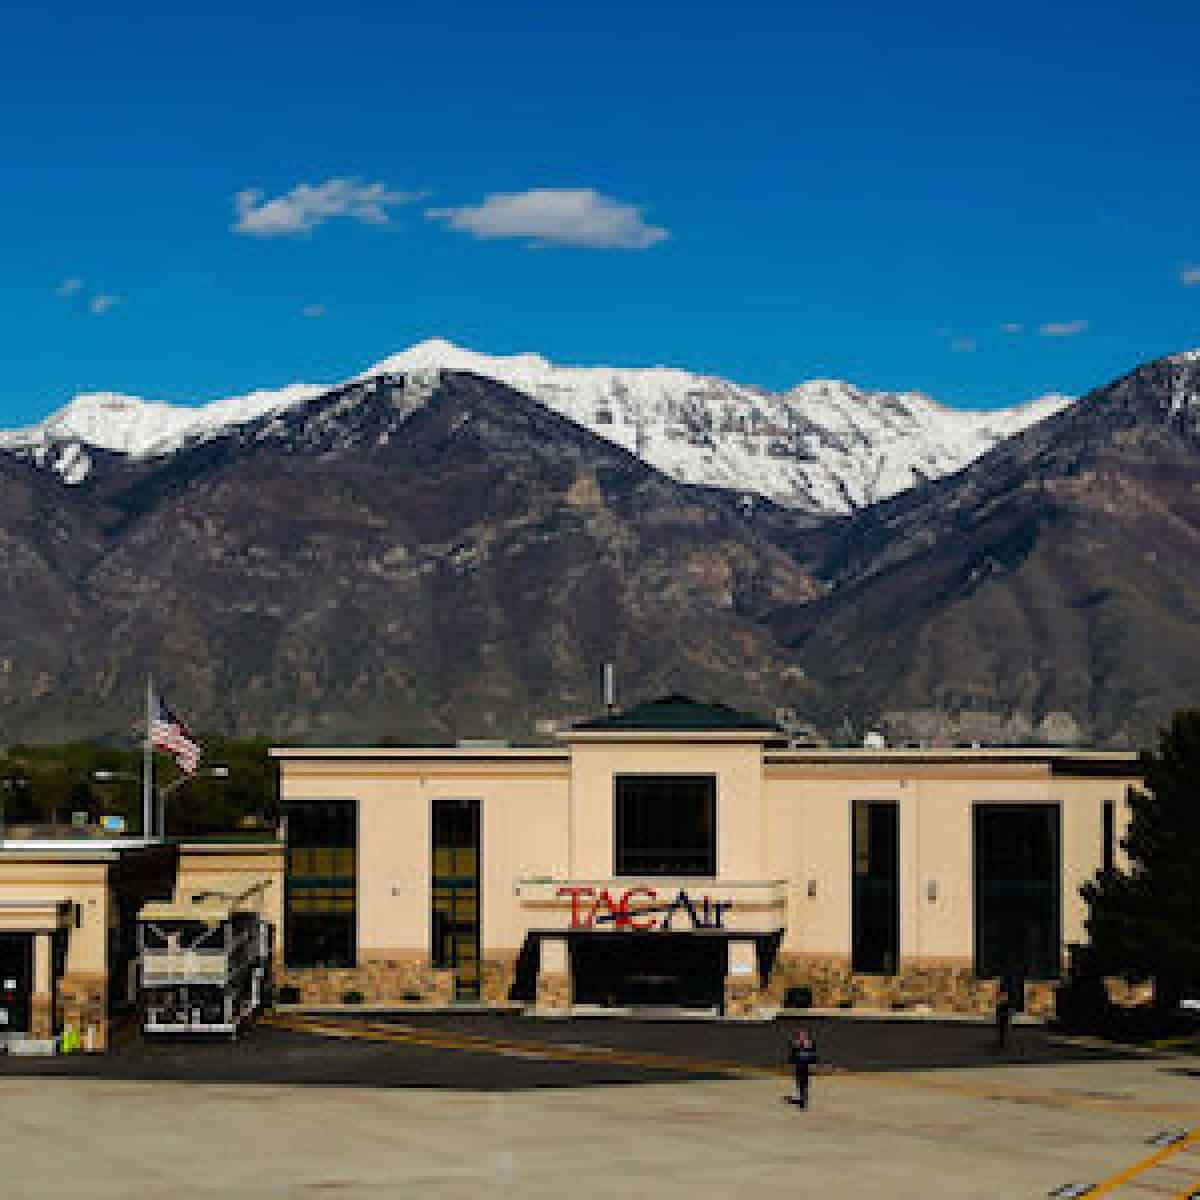 this picture shows the provo airport review with the rocky mountains in the background of the tan colored airport